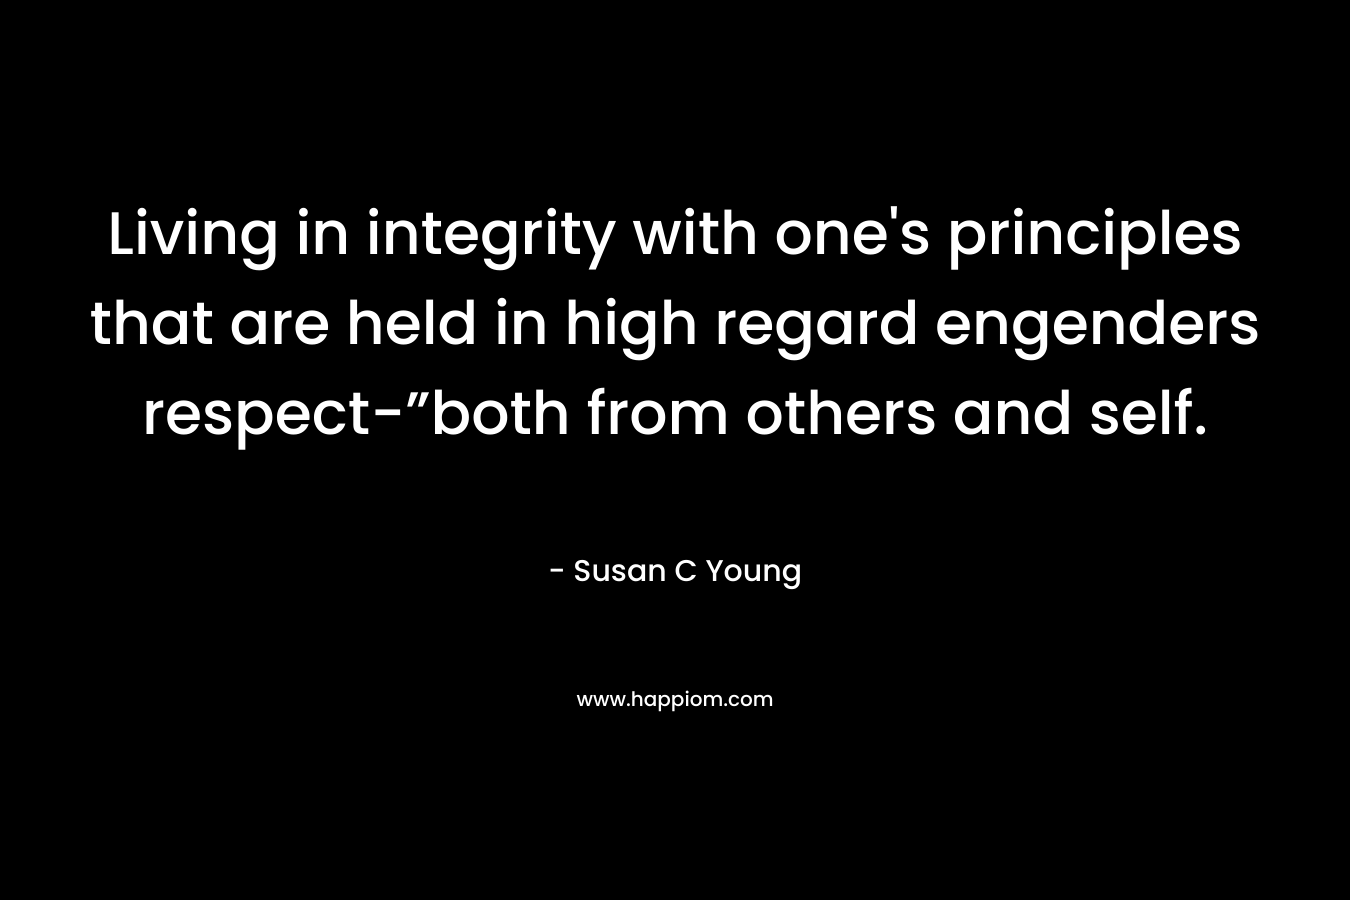 Living in integrity with one's principles that are held in high regard engenders respect-”both from others and self.